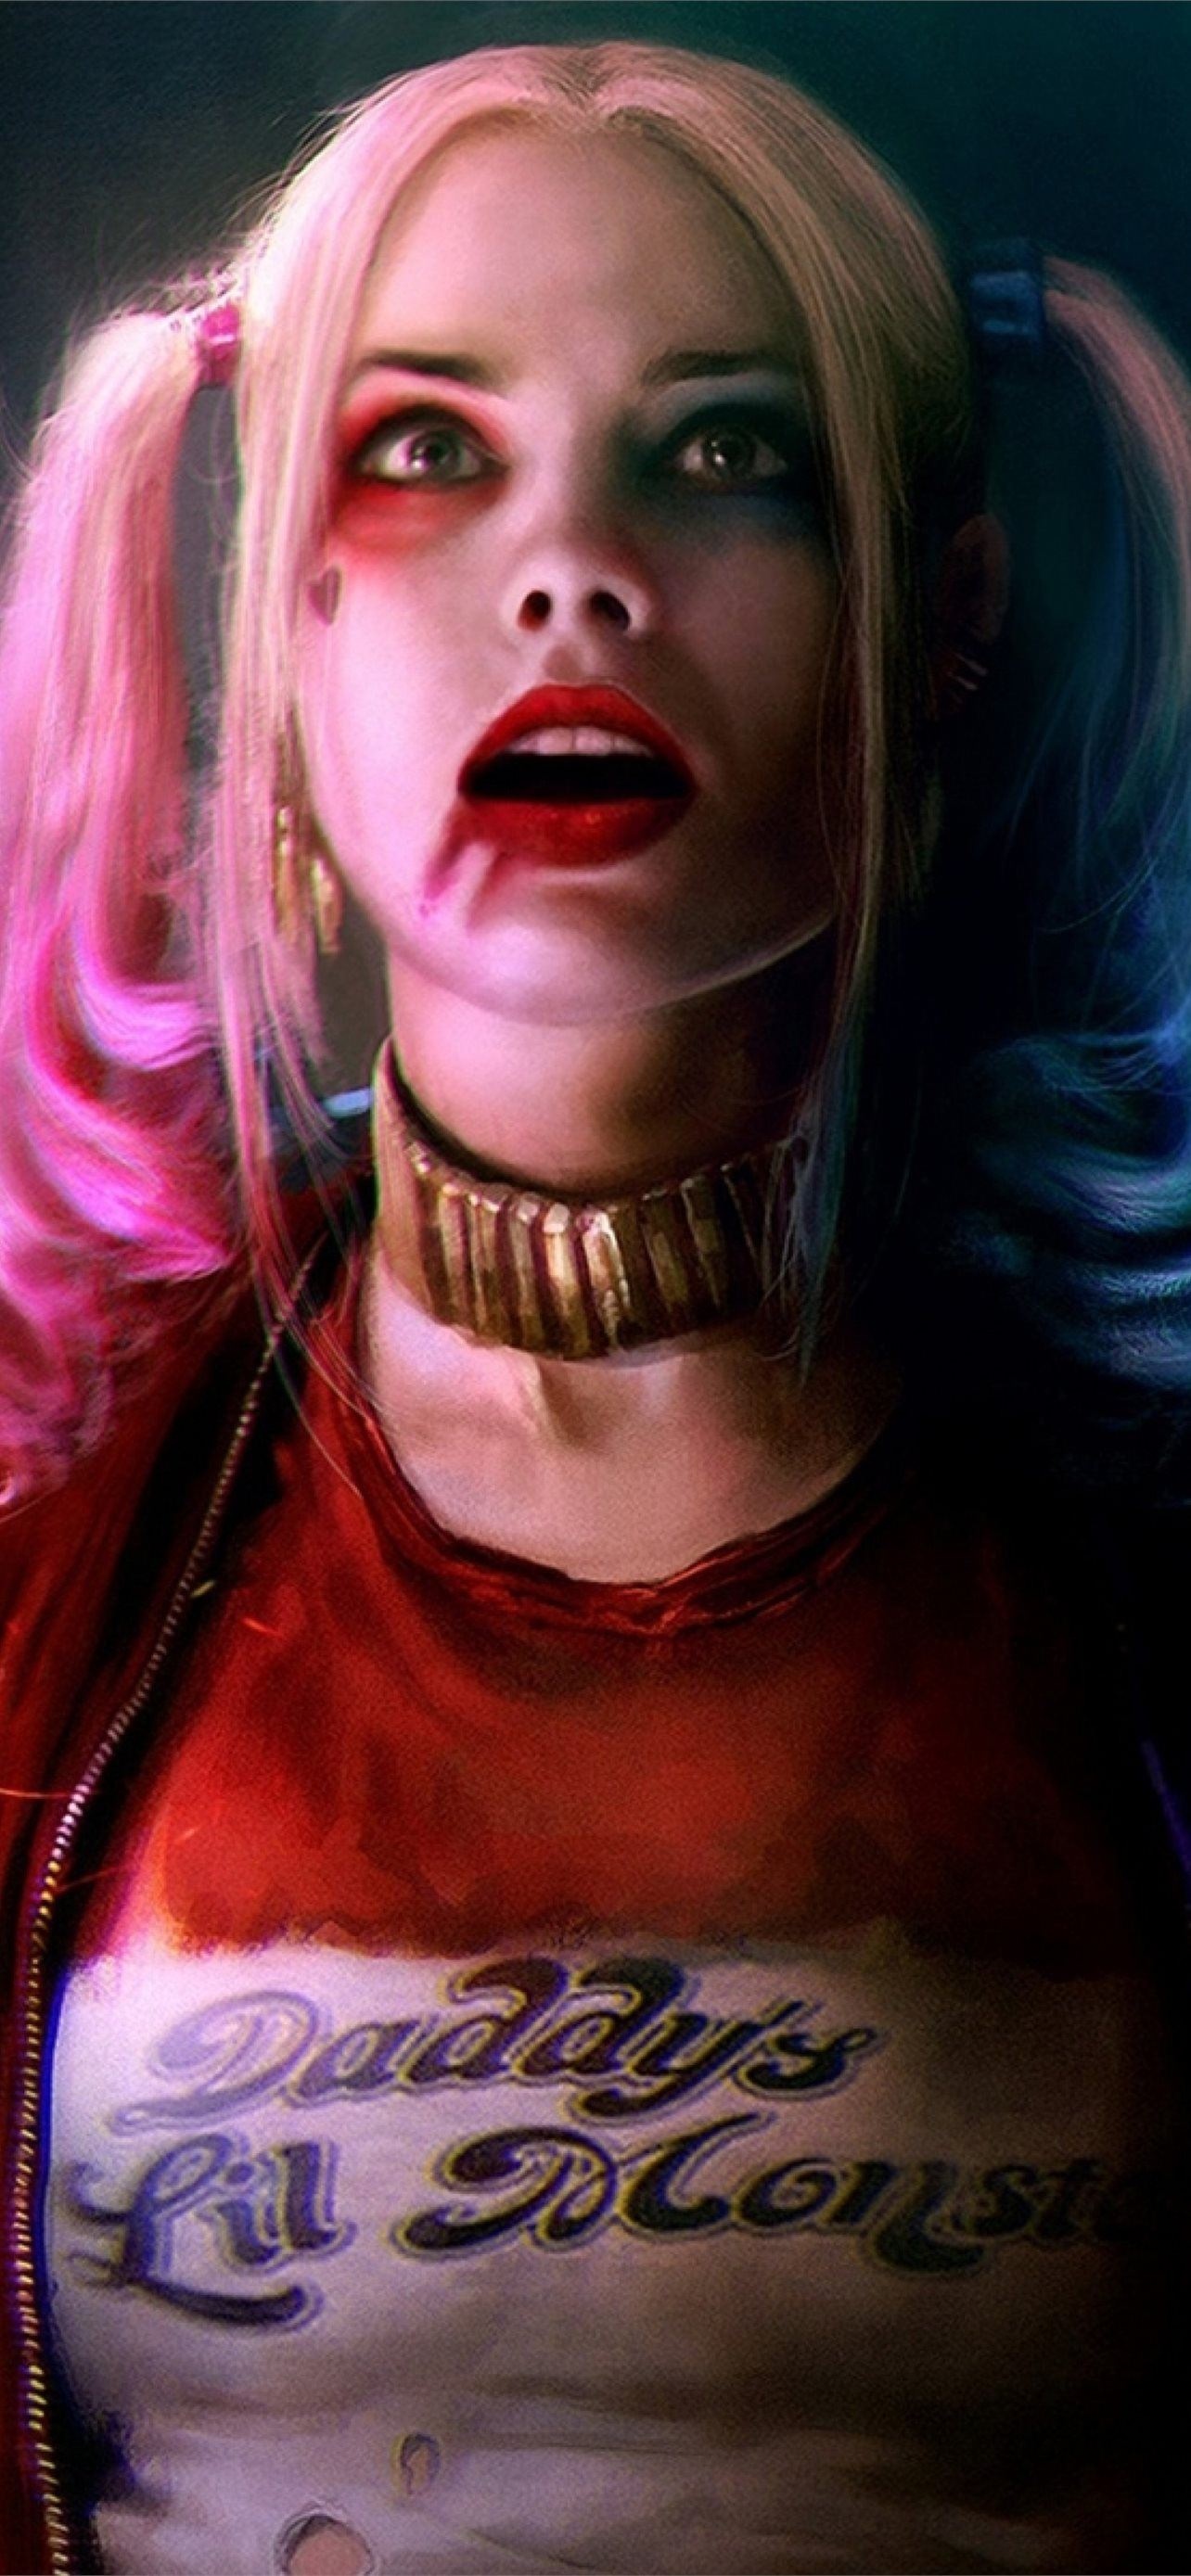 Harley Quinn, Suicide Squad, Margot Robbie wallpapers, 1290x2780 HD Handy